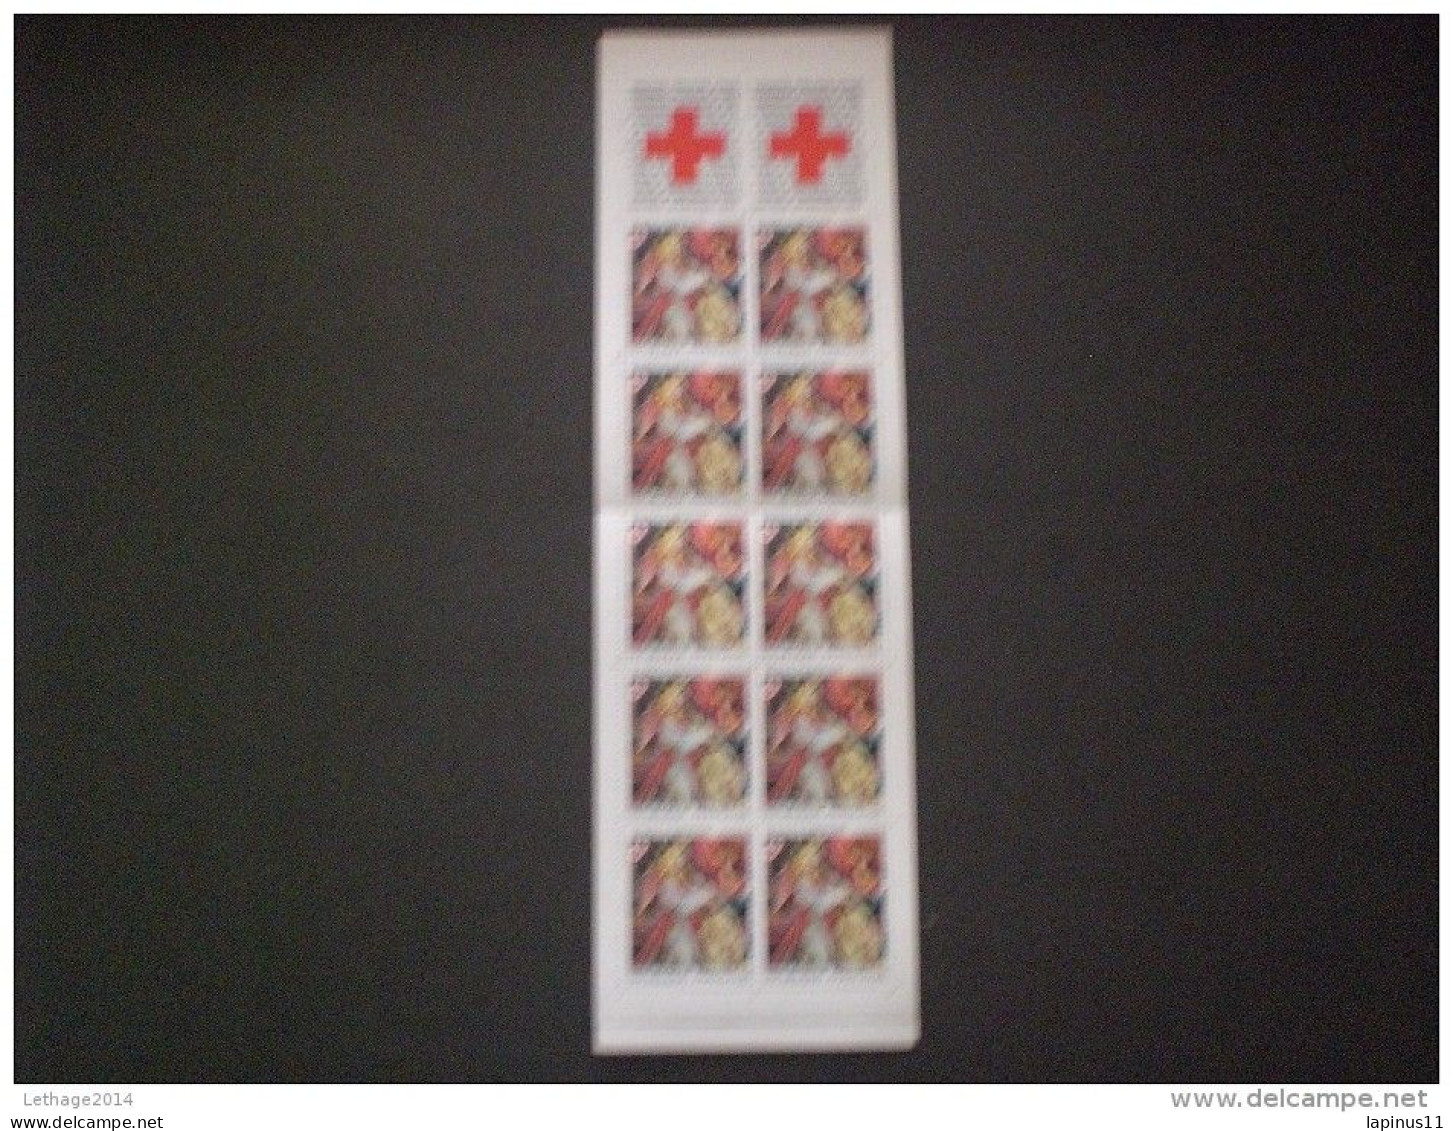 STAMPS FRANCE CARNETS 1985 RED CROSS - People